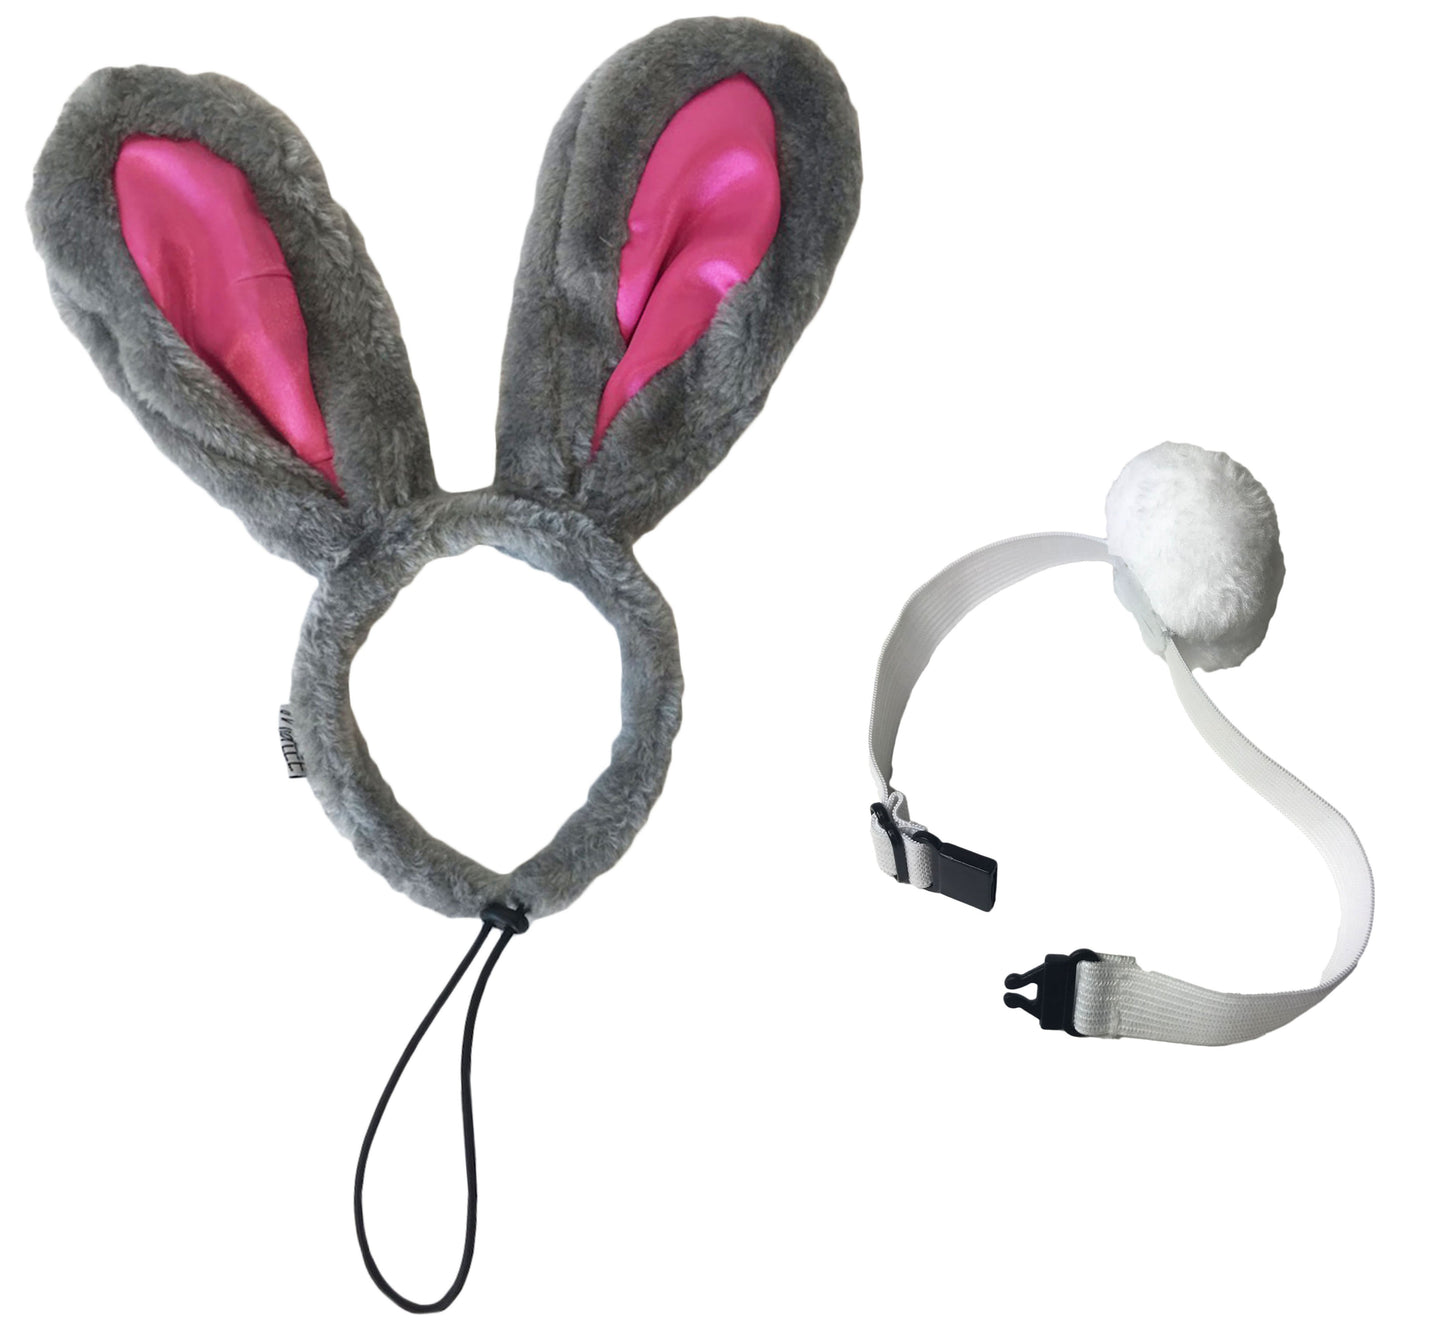 Midlee Easter Bunny Gray & Pink Dog Rabbit Ears with Tail (Small)